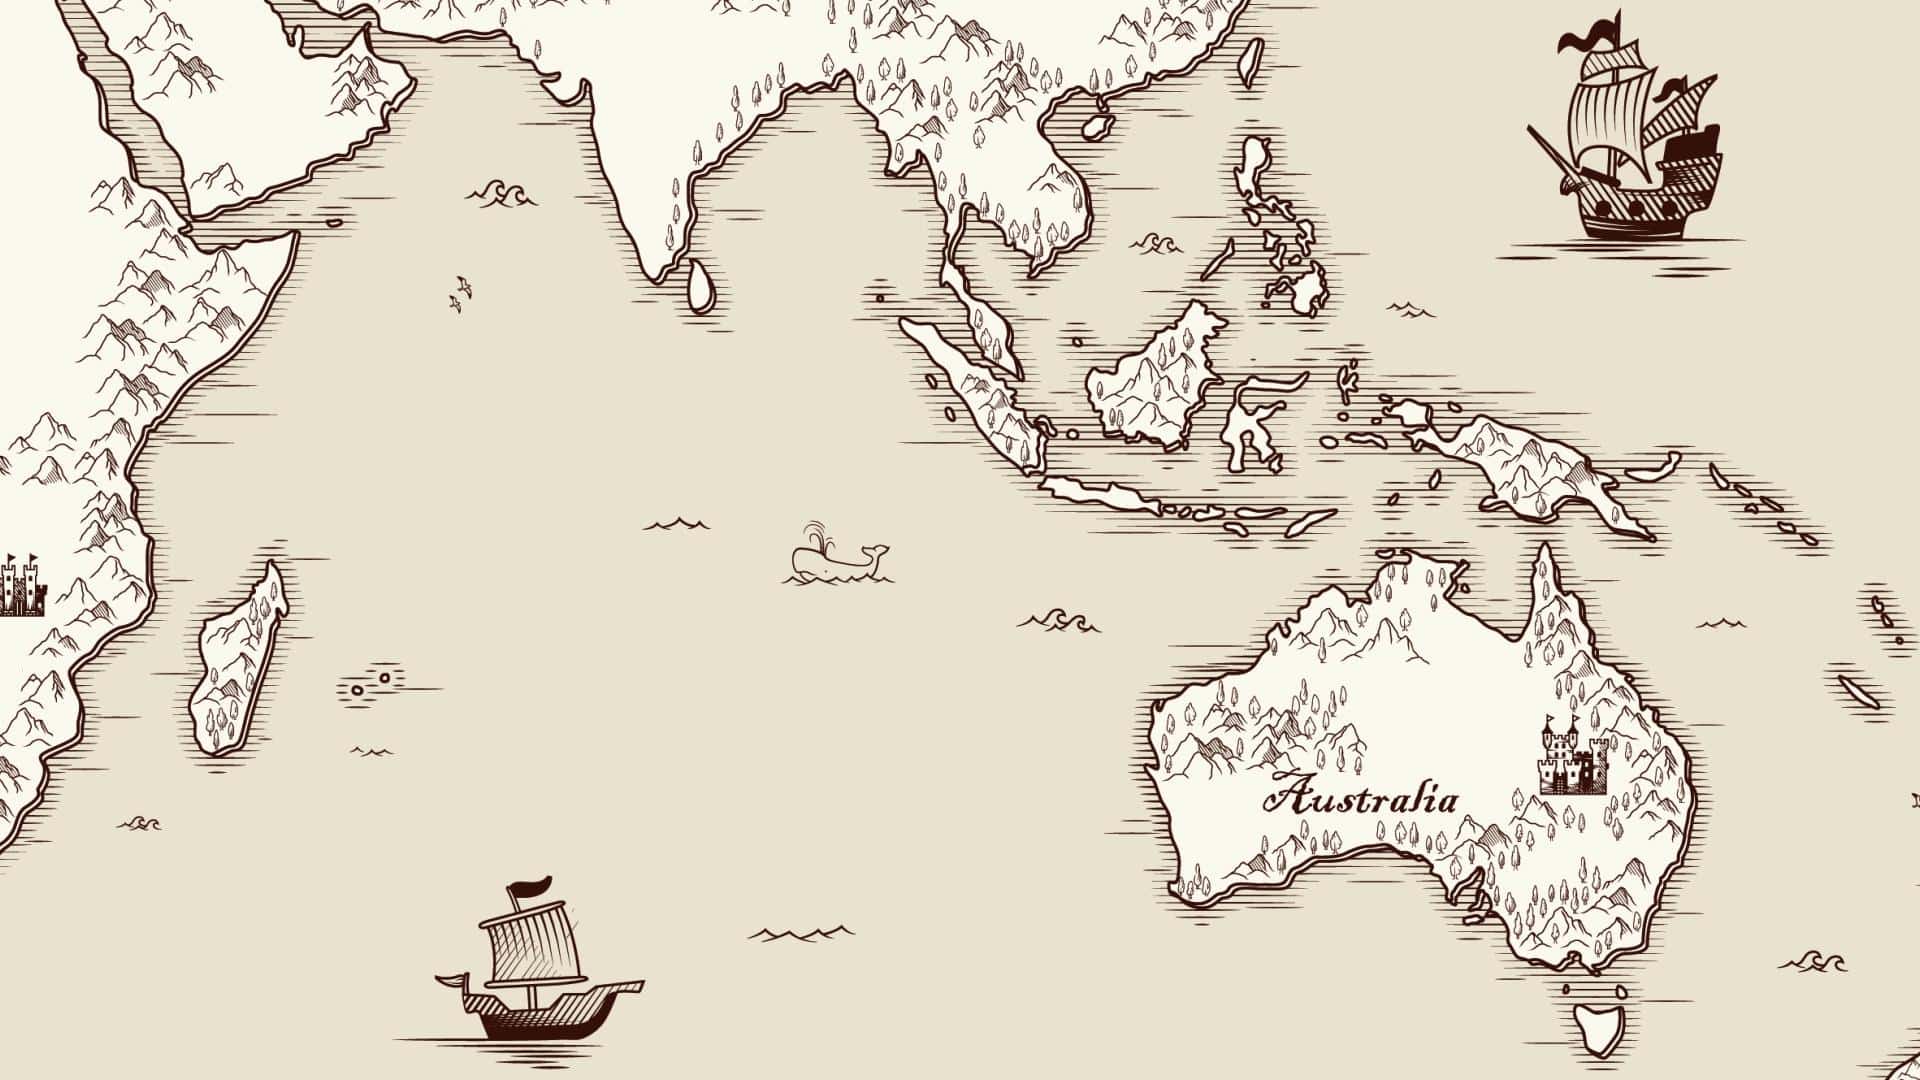 Animation of an old, illustrated map of Australia